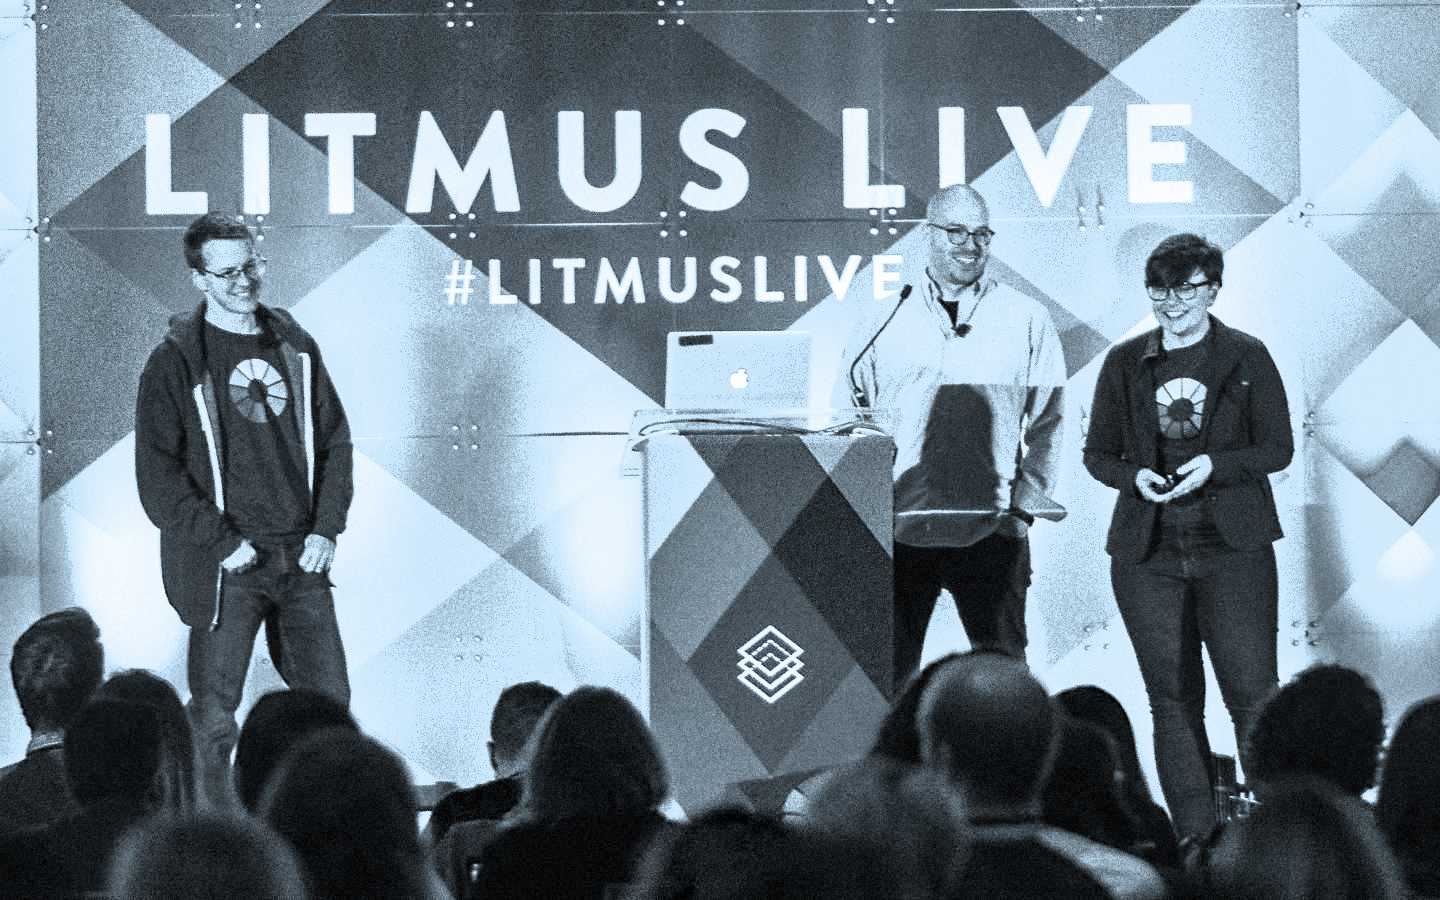 Jason on stage at Litmus Live with Chad S. White and Justine Jordan.